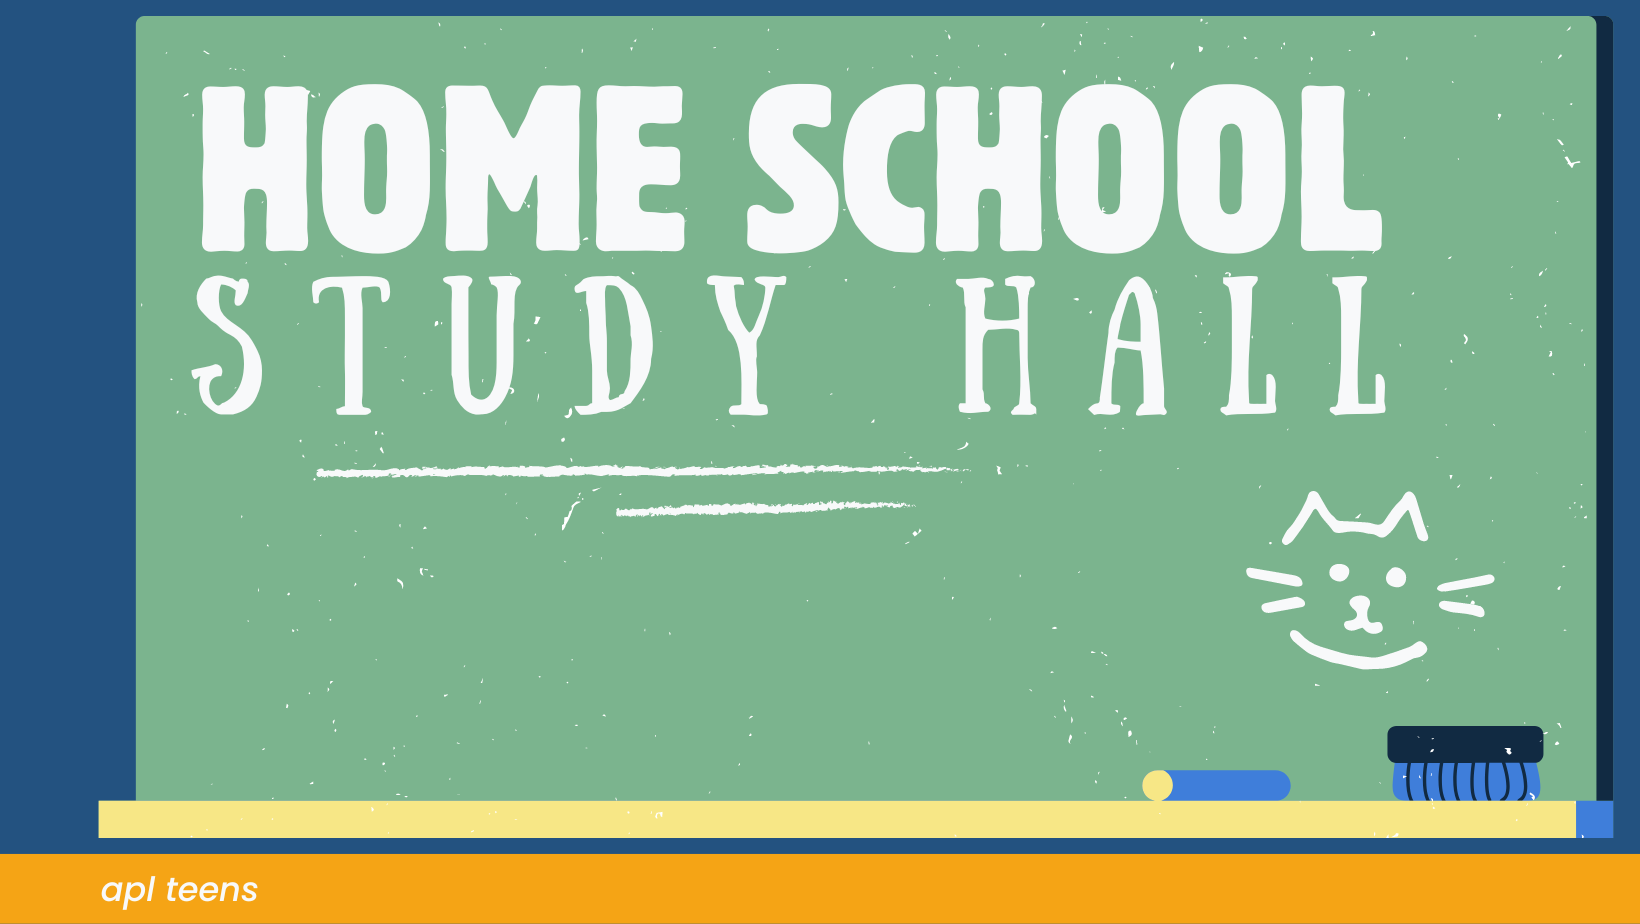 An illustration of a chalk board with white text that reads "HOME SCHOOL STUDY HALL."